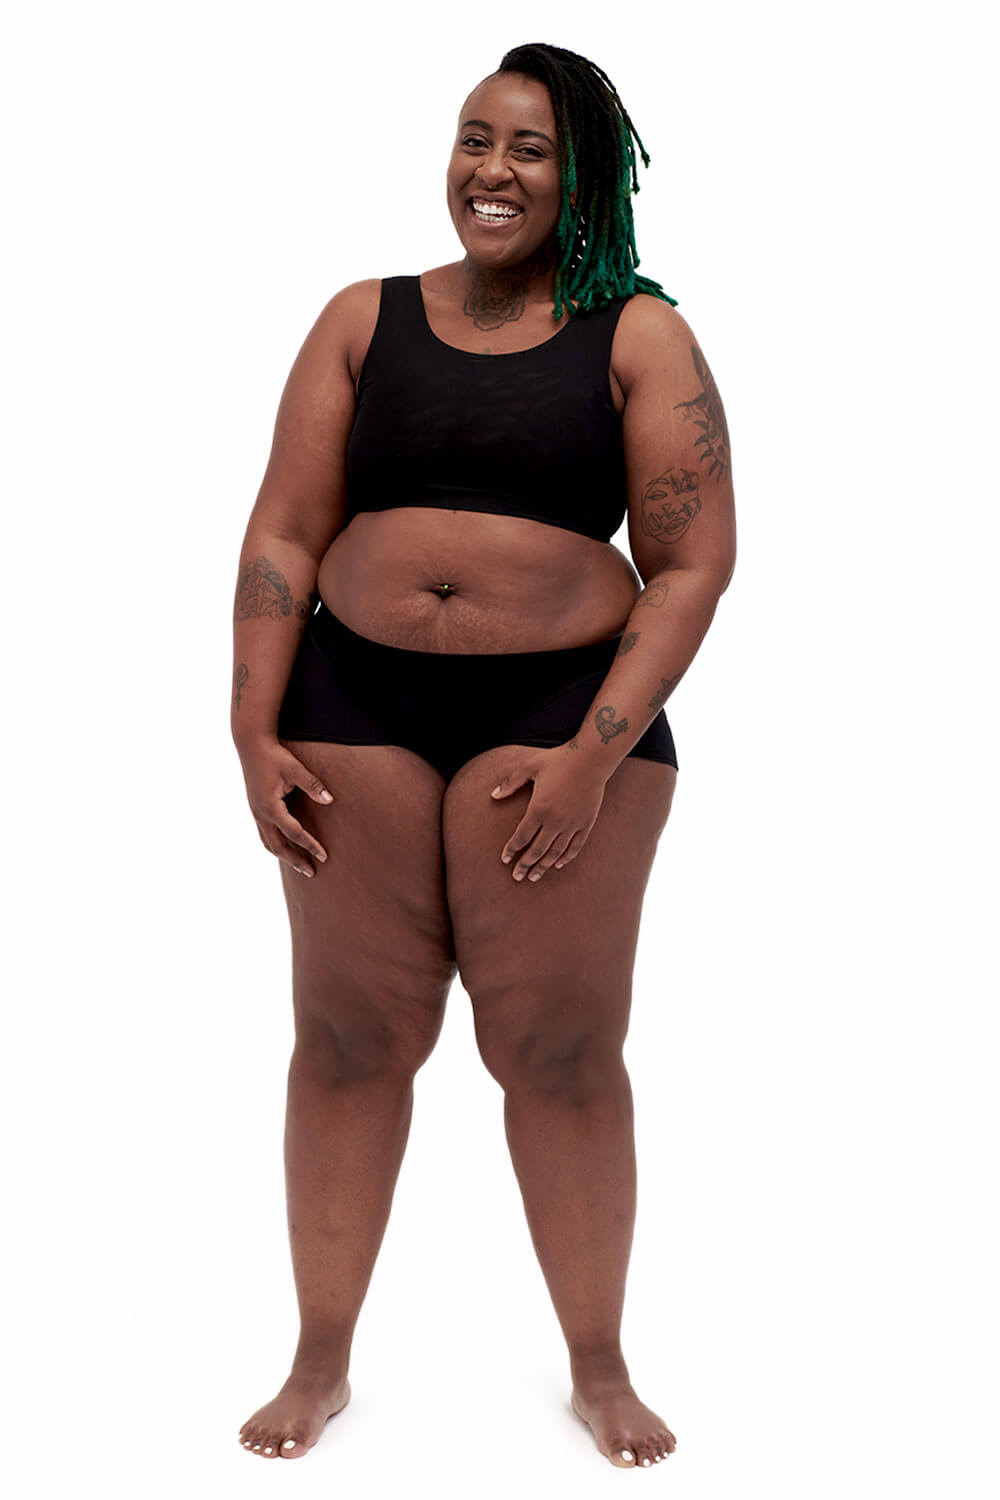 Plus-sized person wearing a black sports bra style chest binder made from breathable mesh, photographed from the front.